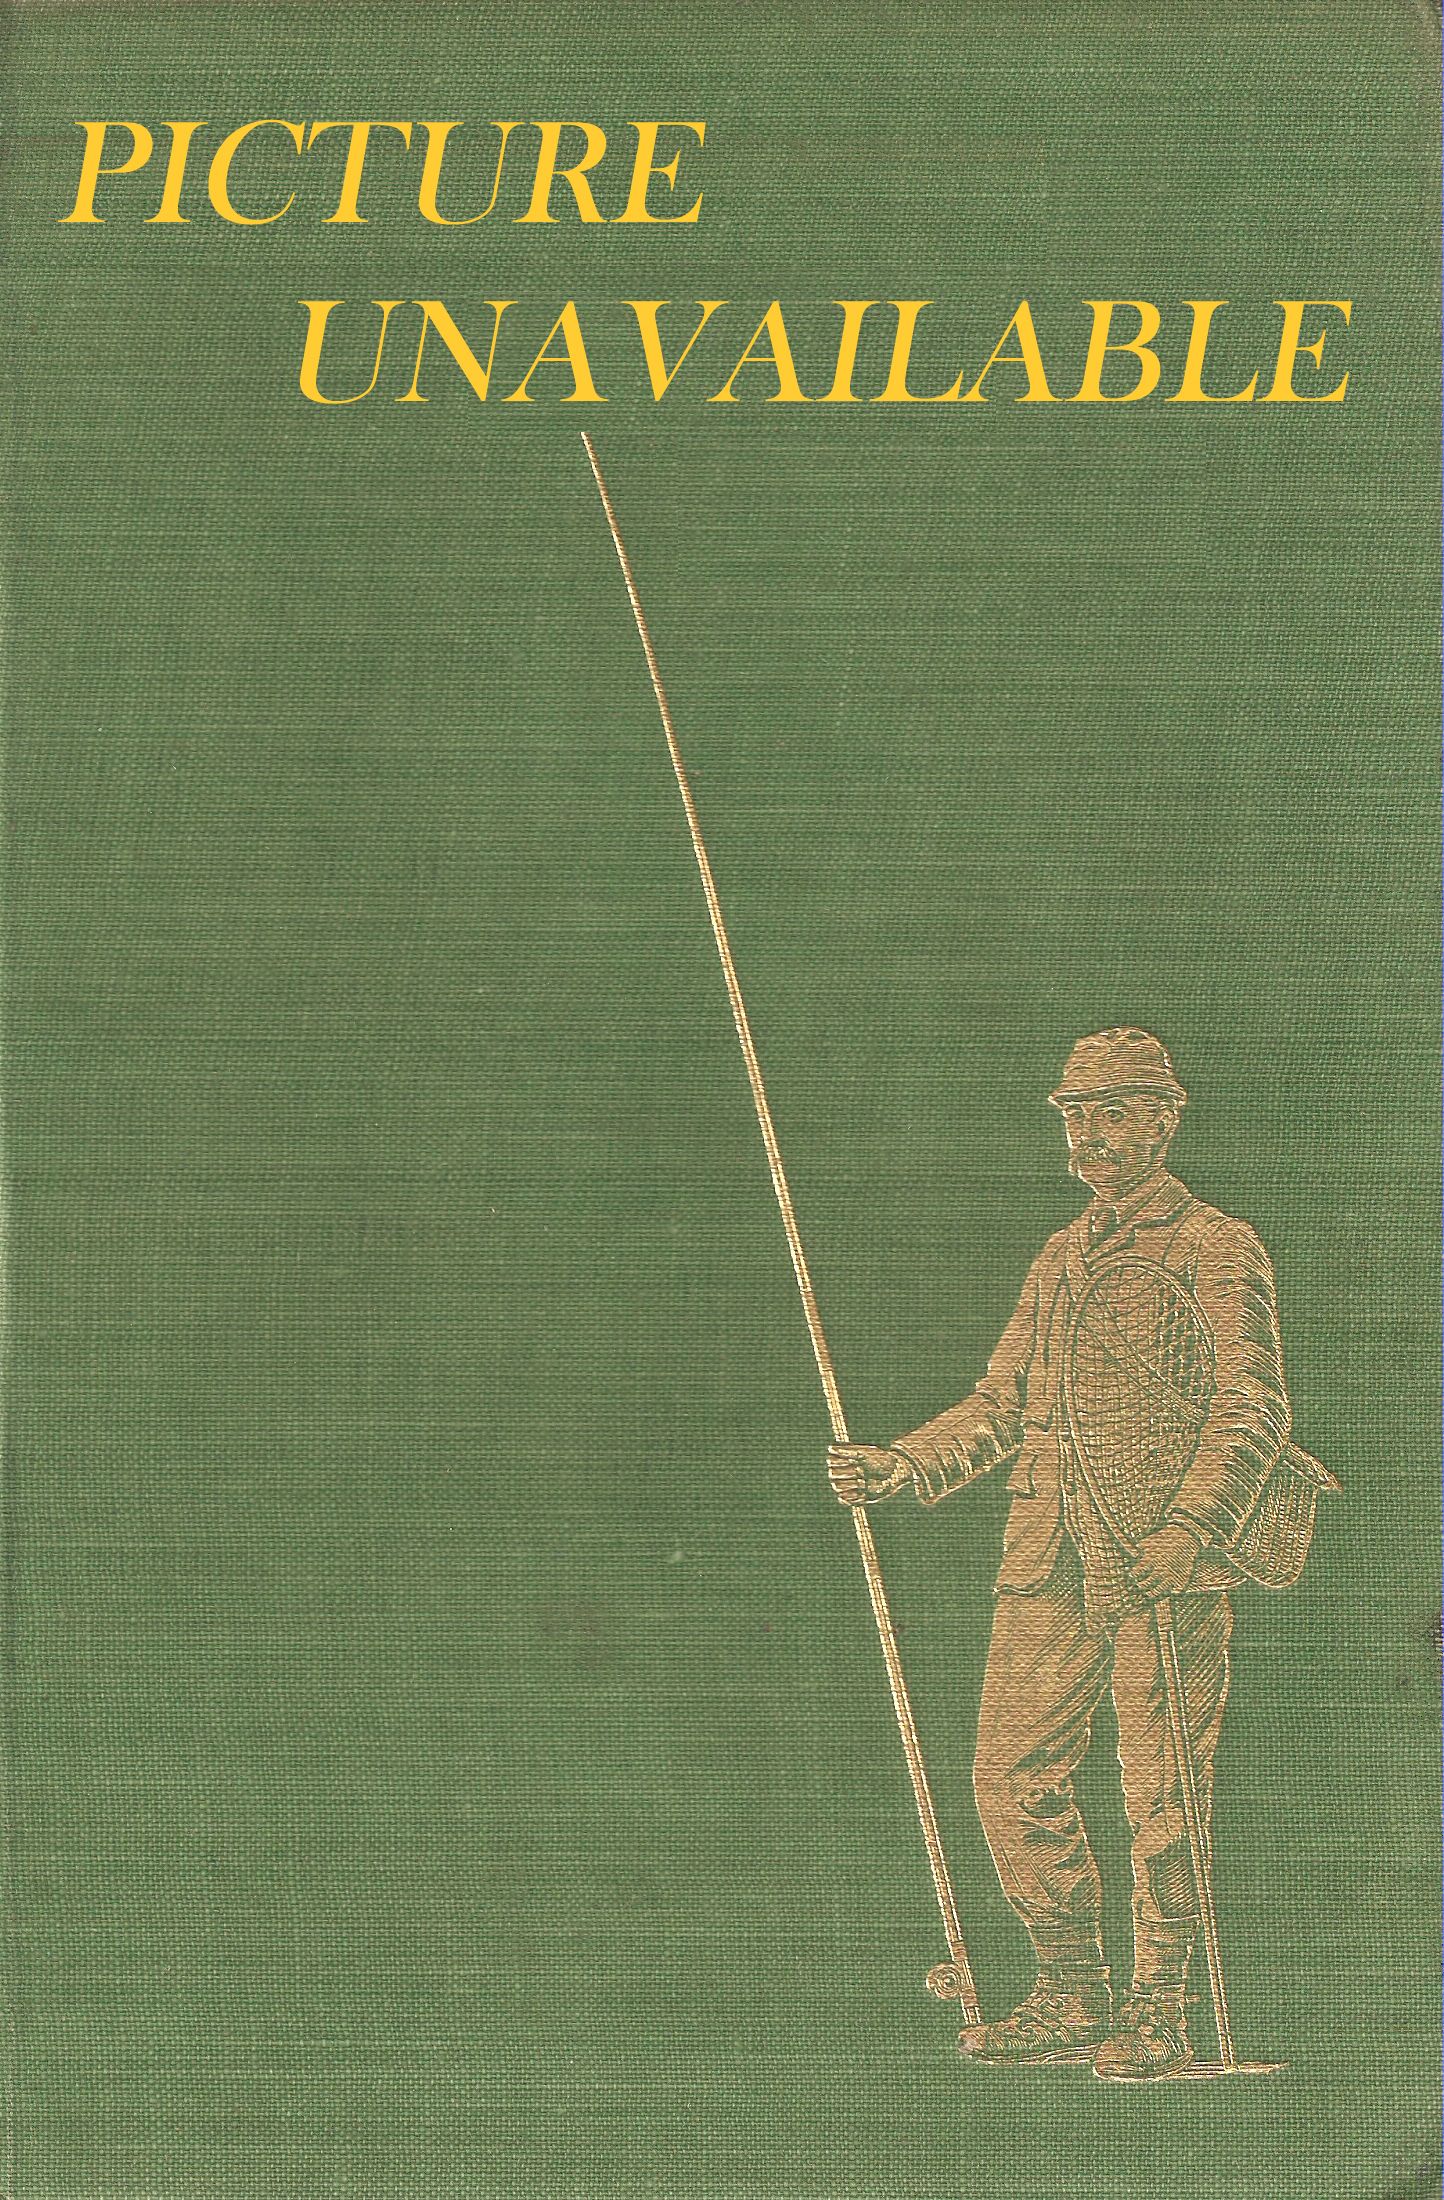 NEVER BOW TO THE RIVER: SALMON FISHING - THE WHY AND THE WHEREFORE. By  George Gawthorn.